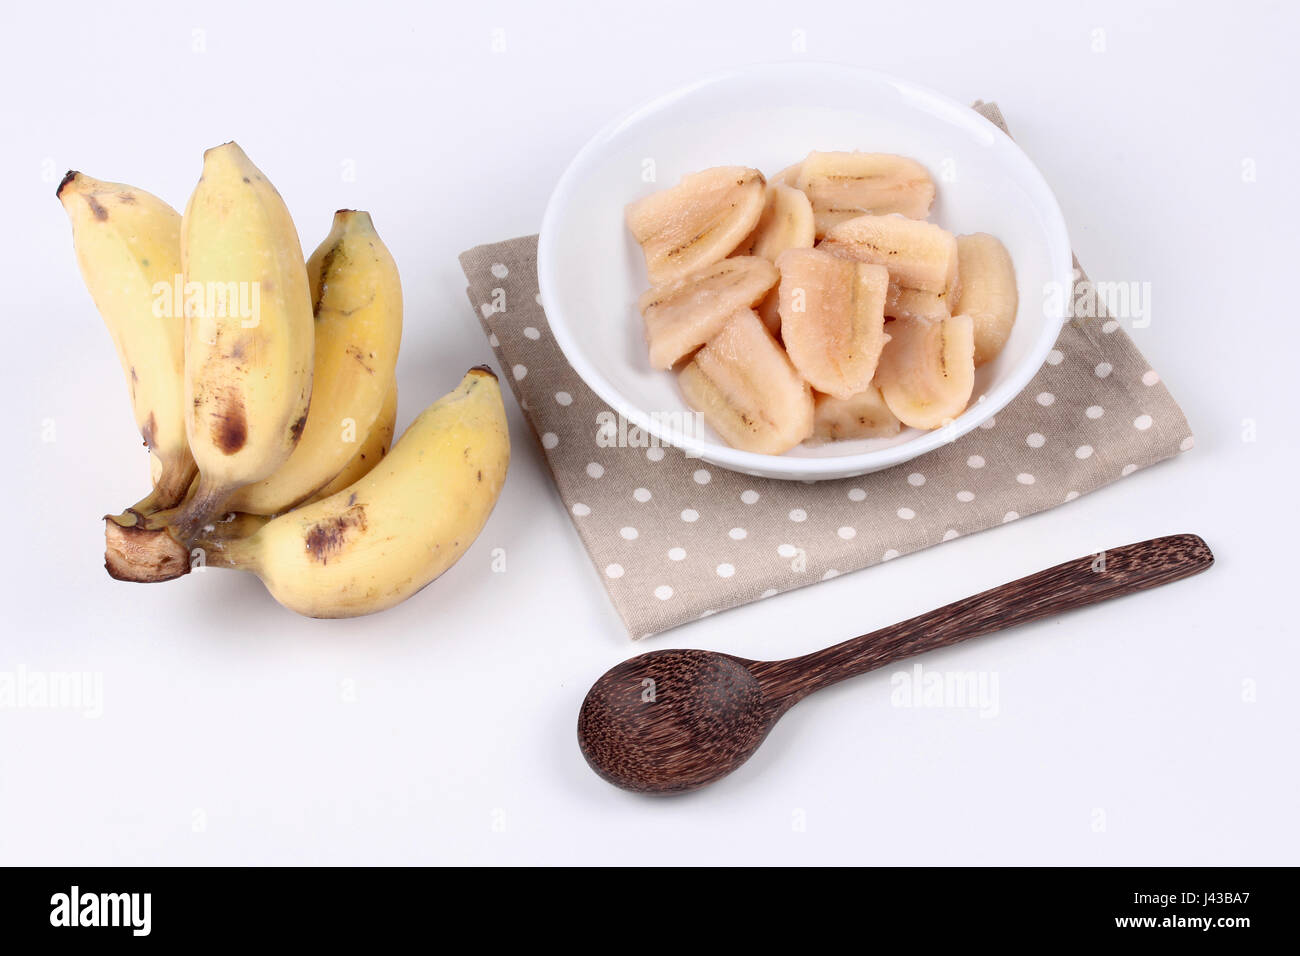 Thai popular dessert , Ready served of boiled banana in syrup and wholes of banana served on wood. Stock Photo